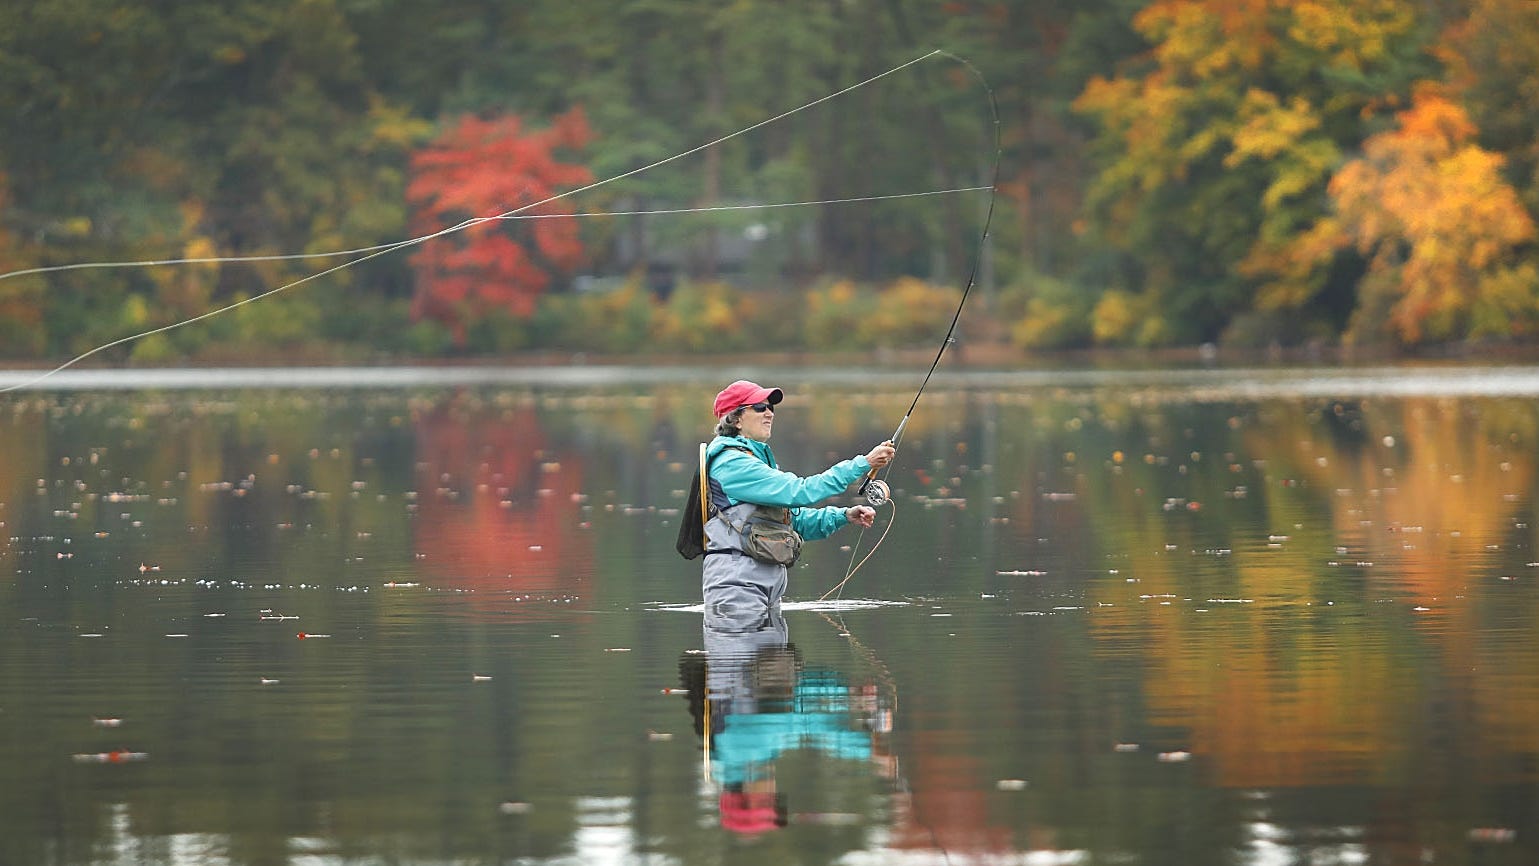 Cathy MacCurtain, of Braintree, who took up fly fishing three years ago, casts for trout in Houghton's Pond, Milton, on Tuesday, Oct. 20, 2020. (Greg Derr/ The Patriot Ledger)